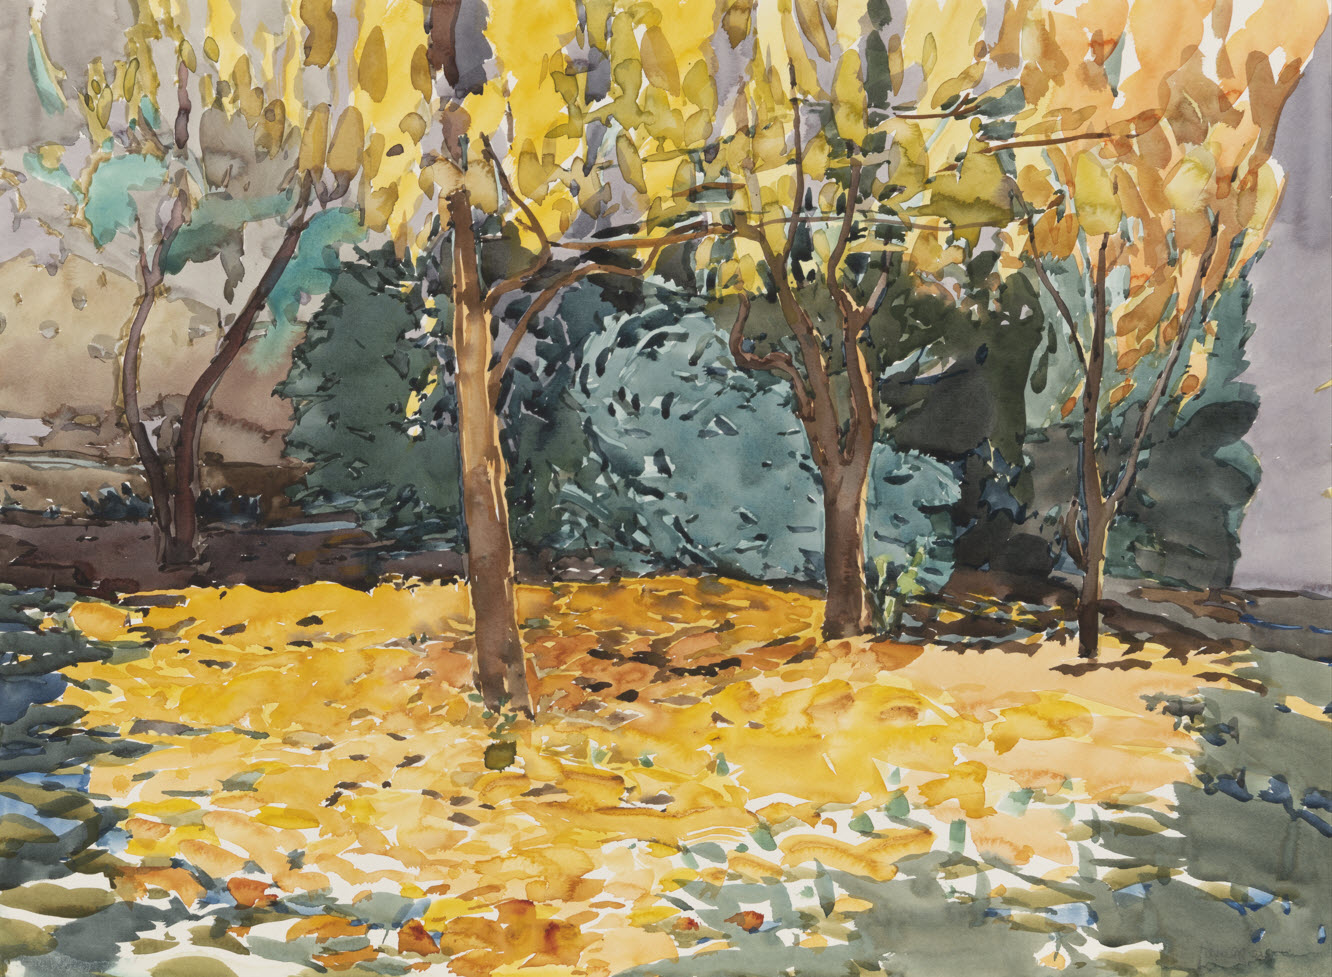 Late afternoon under the tree canopy near the Boyce Thompson picnic area.
Boyce Thompson Arboretum by Bruce McGrew, c. 1980. Watercolor, 22 in. x 30 in.